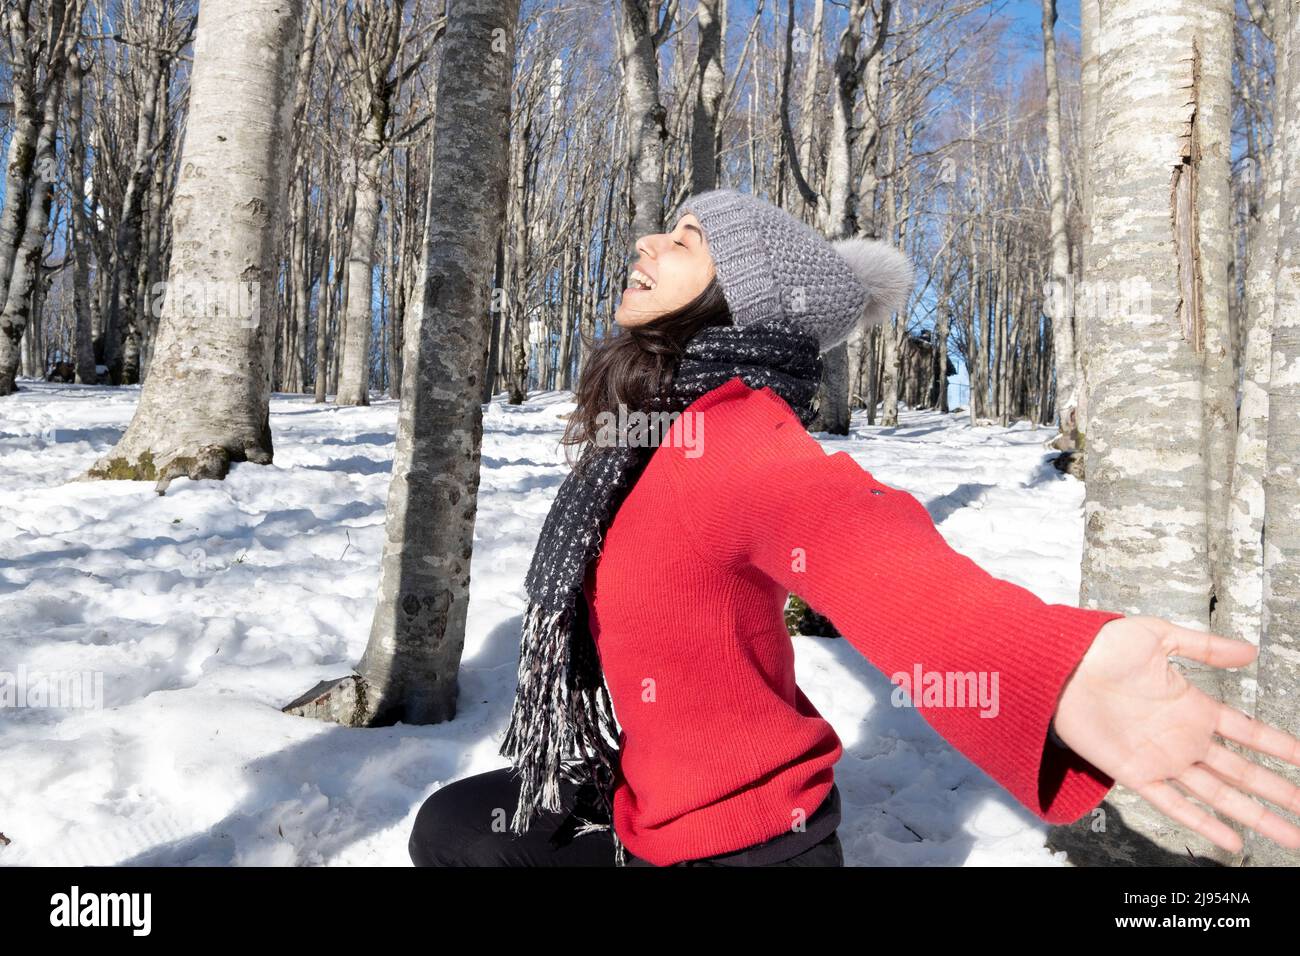 Brunette woman in winter forest. Outdoor portrait of young woman in winter cap and muffler enjoying the winter. Posing and having fun. Italy Stock Photo